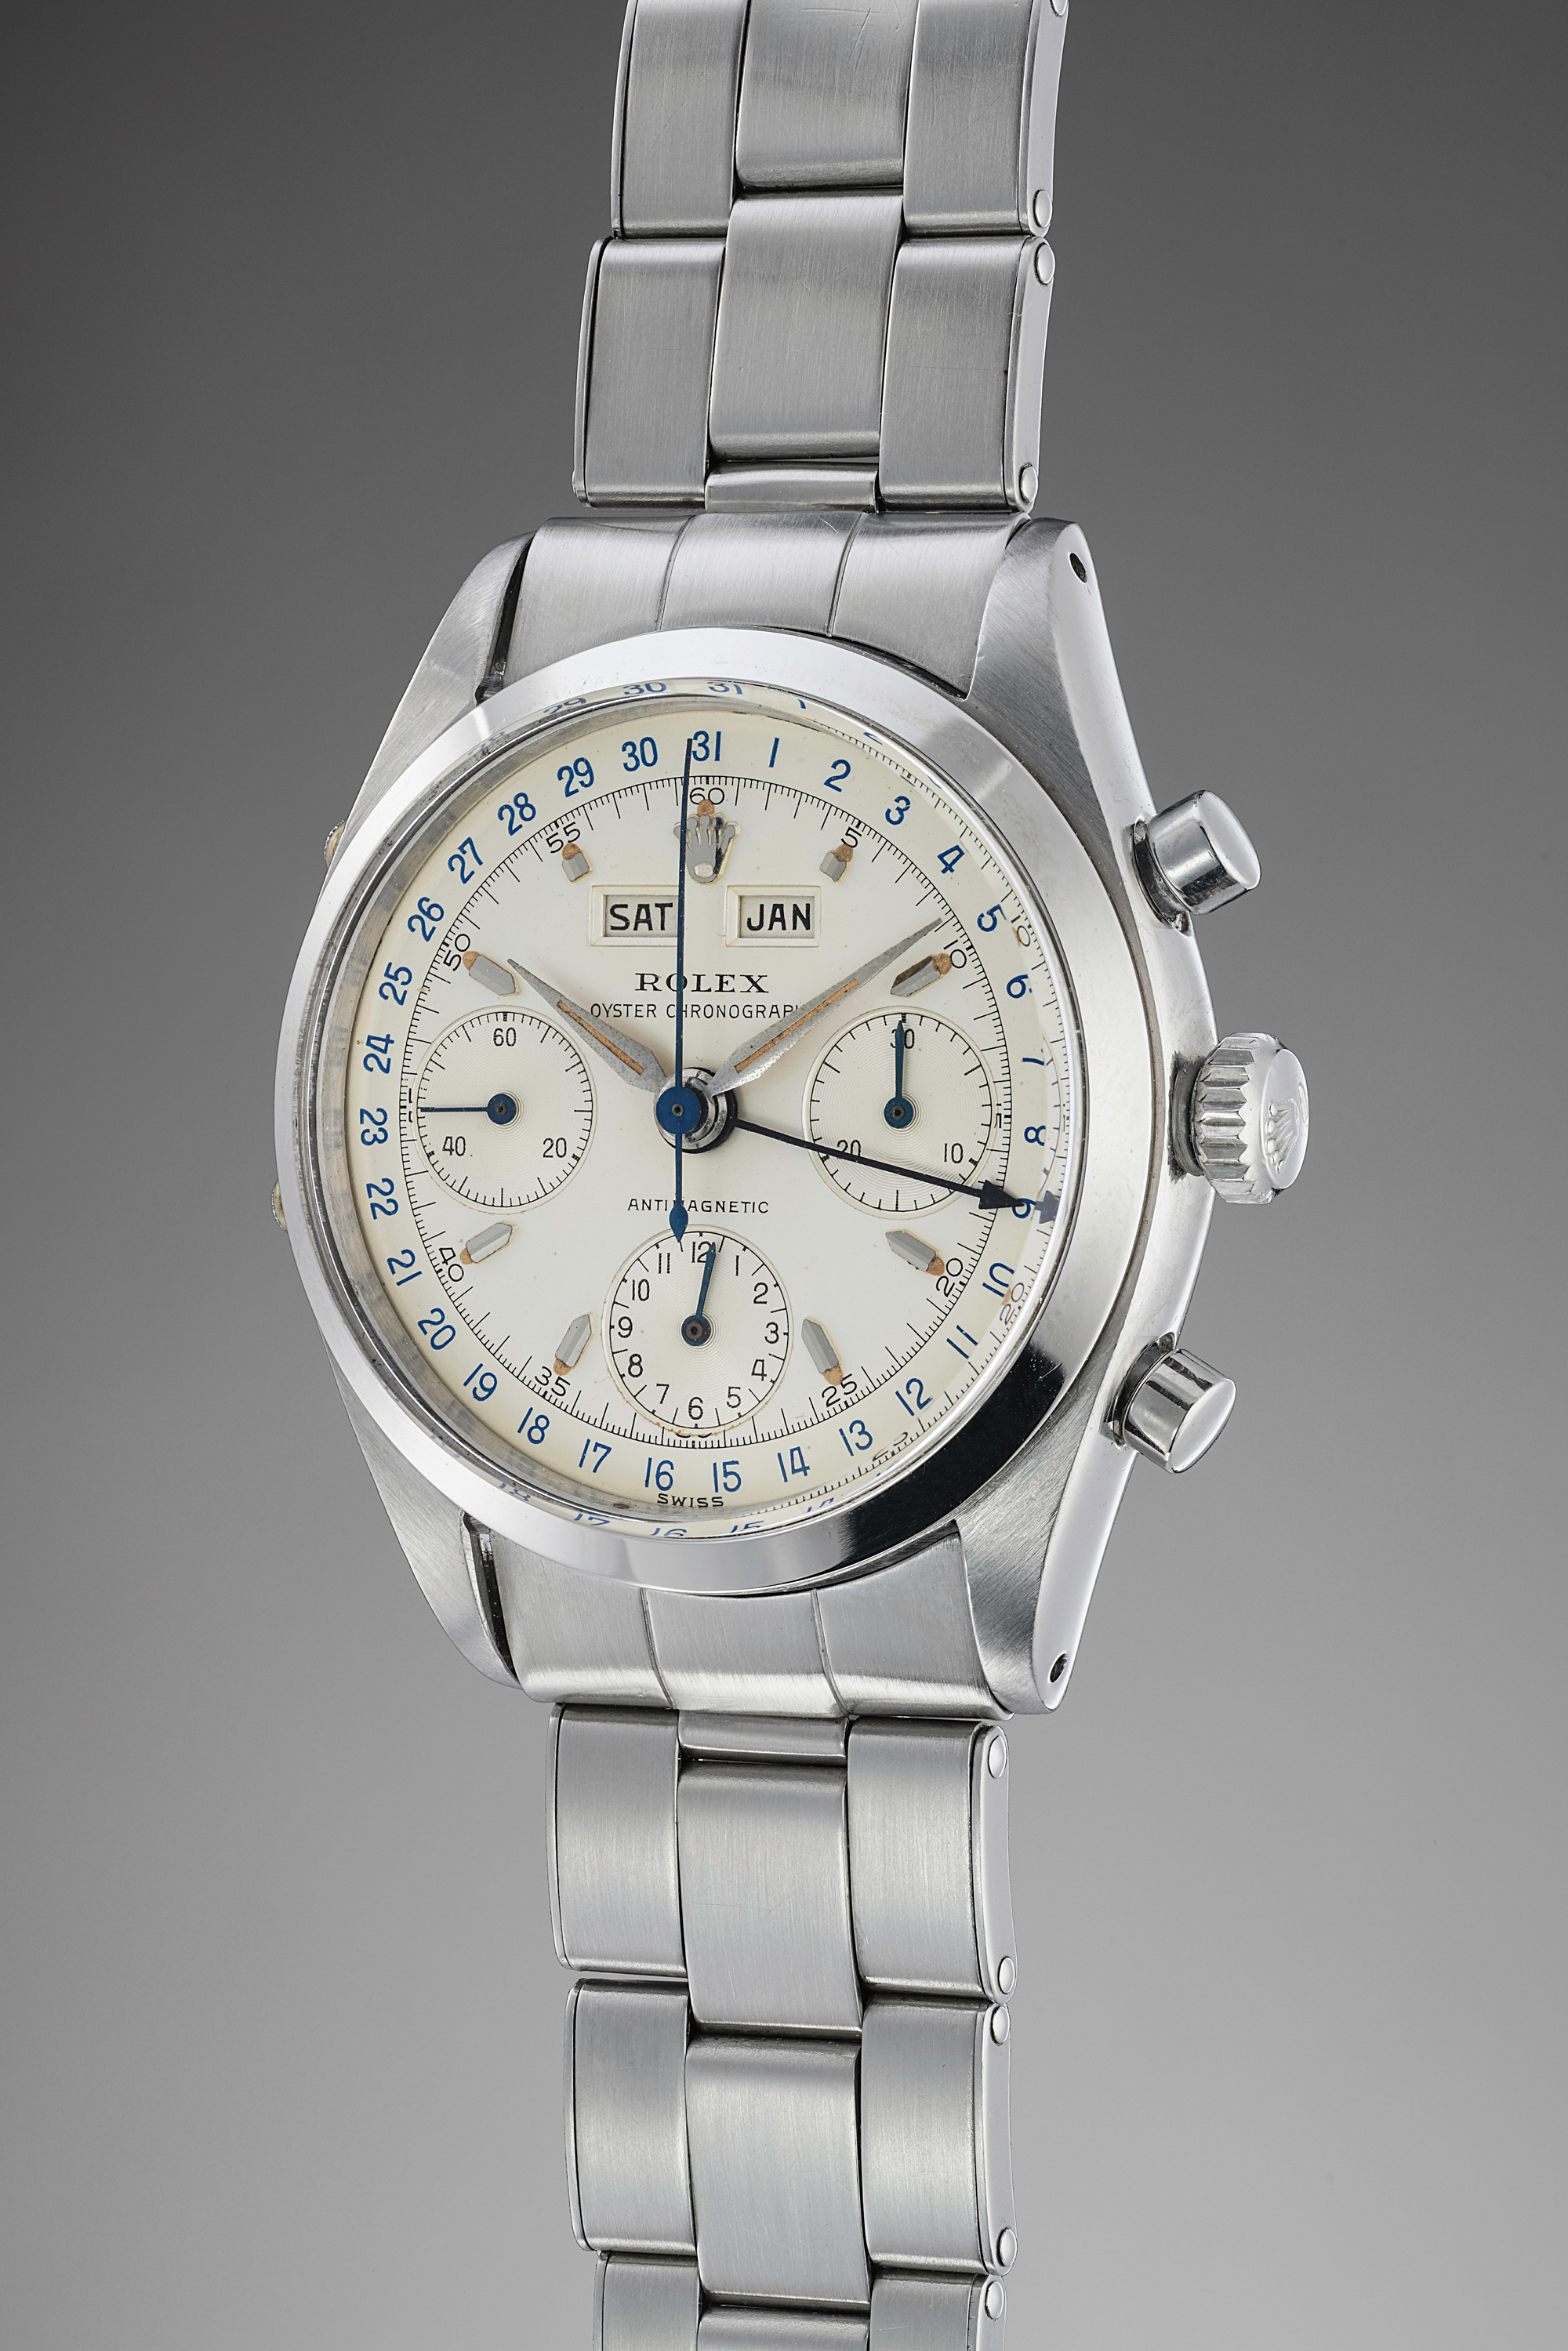 A very fine and rare, incredibly well preserved stainless-steel triple calendar chronograph wristwatch with bracelet. World record for any Rolex “Jean-Claud Killy” ever sold at auction.